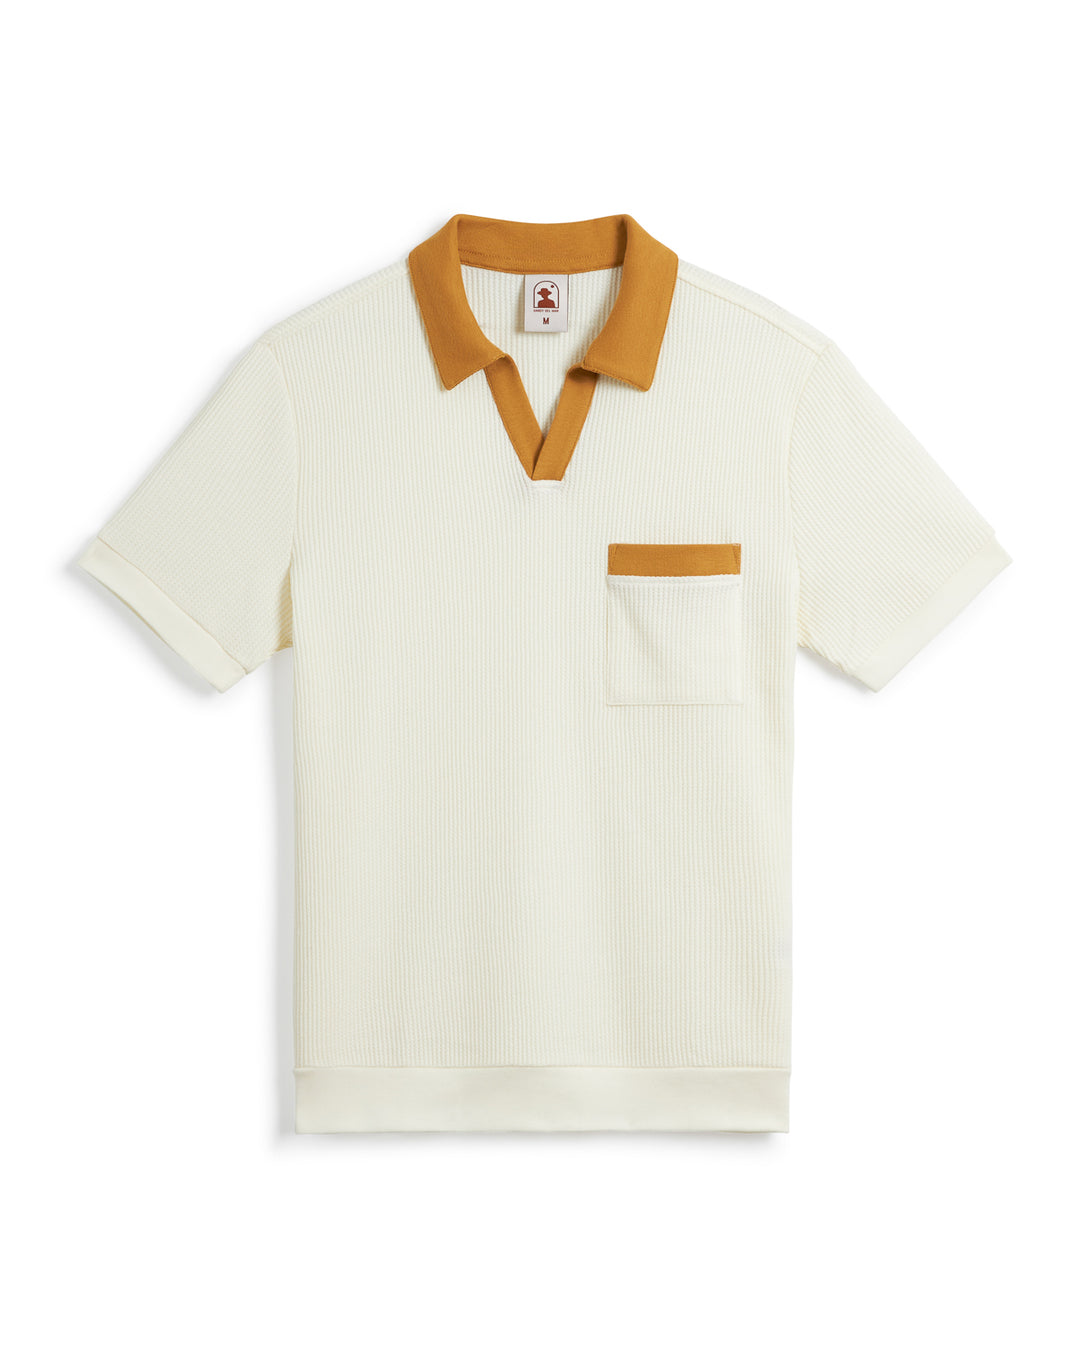 A white short-sleeve polo shirt with a ribbed texture, mustard yellow collar, and pocket trim. This Dandy Del Mar Cannes Waffle Knit Shirt - Vintage Ivory features a buttonless polo collar and subtle waffle knit fabric for added style and comfort.